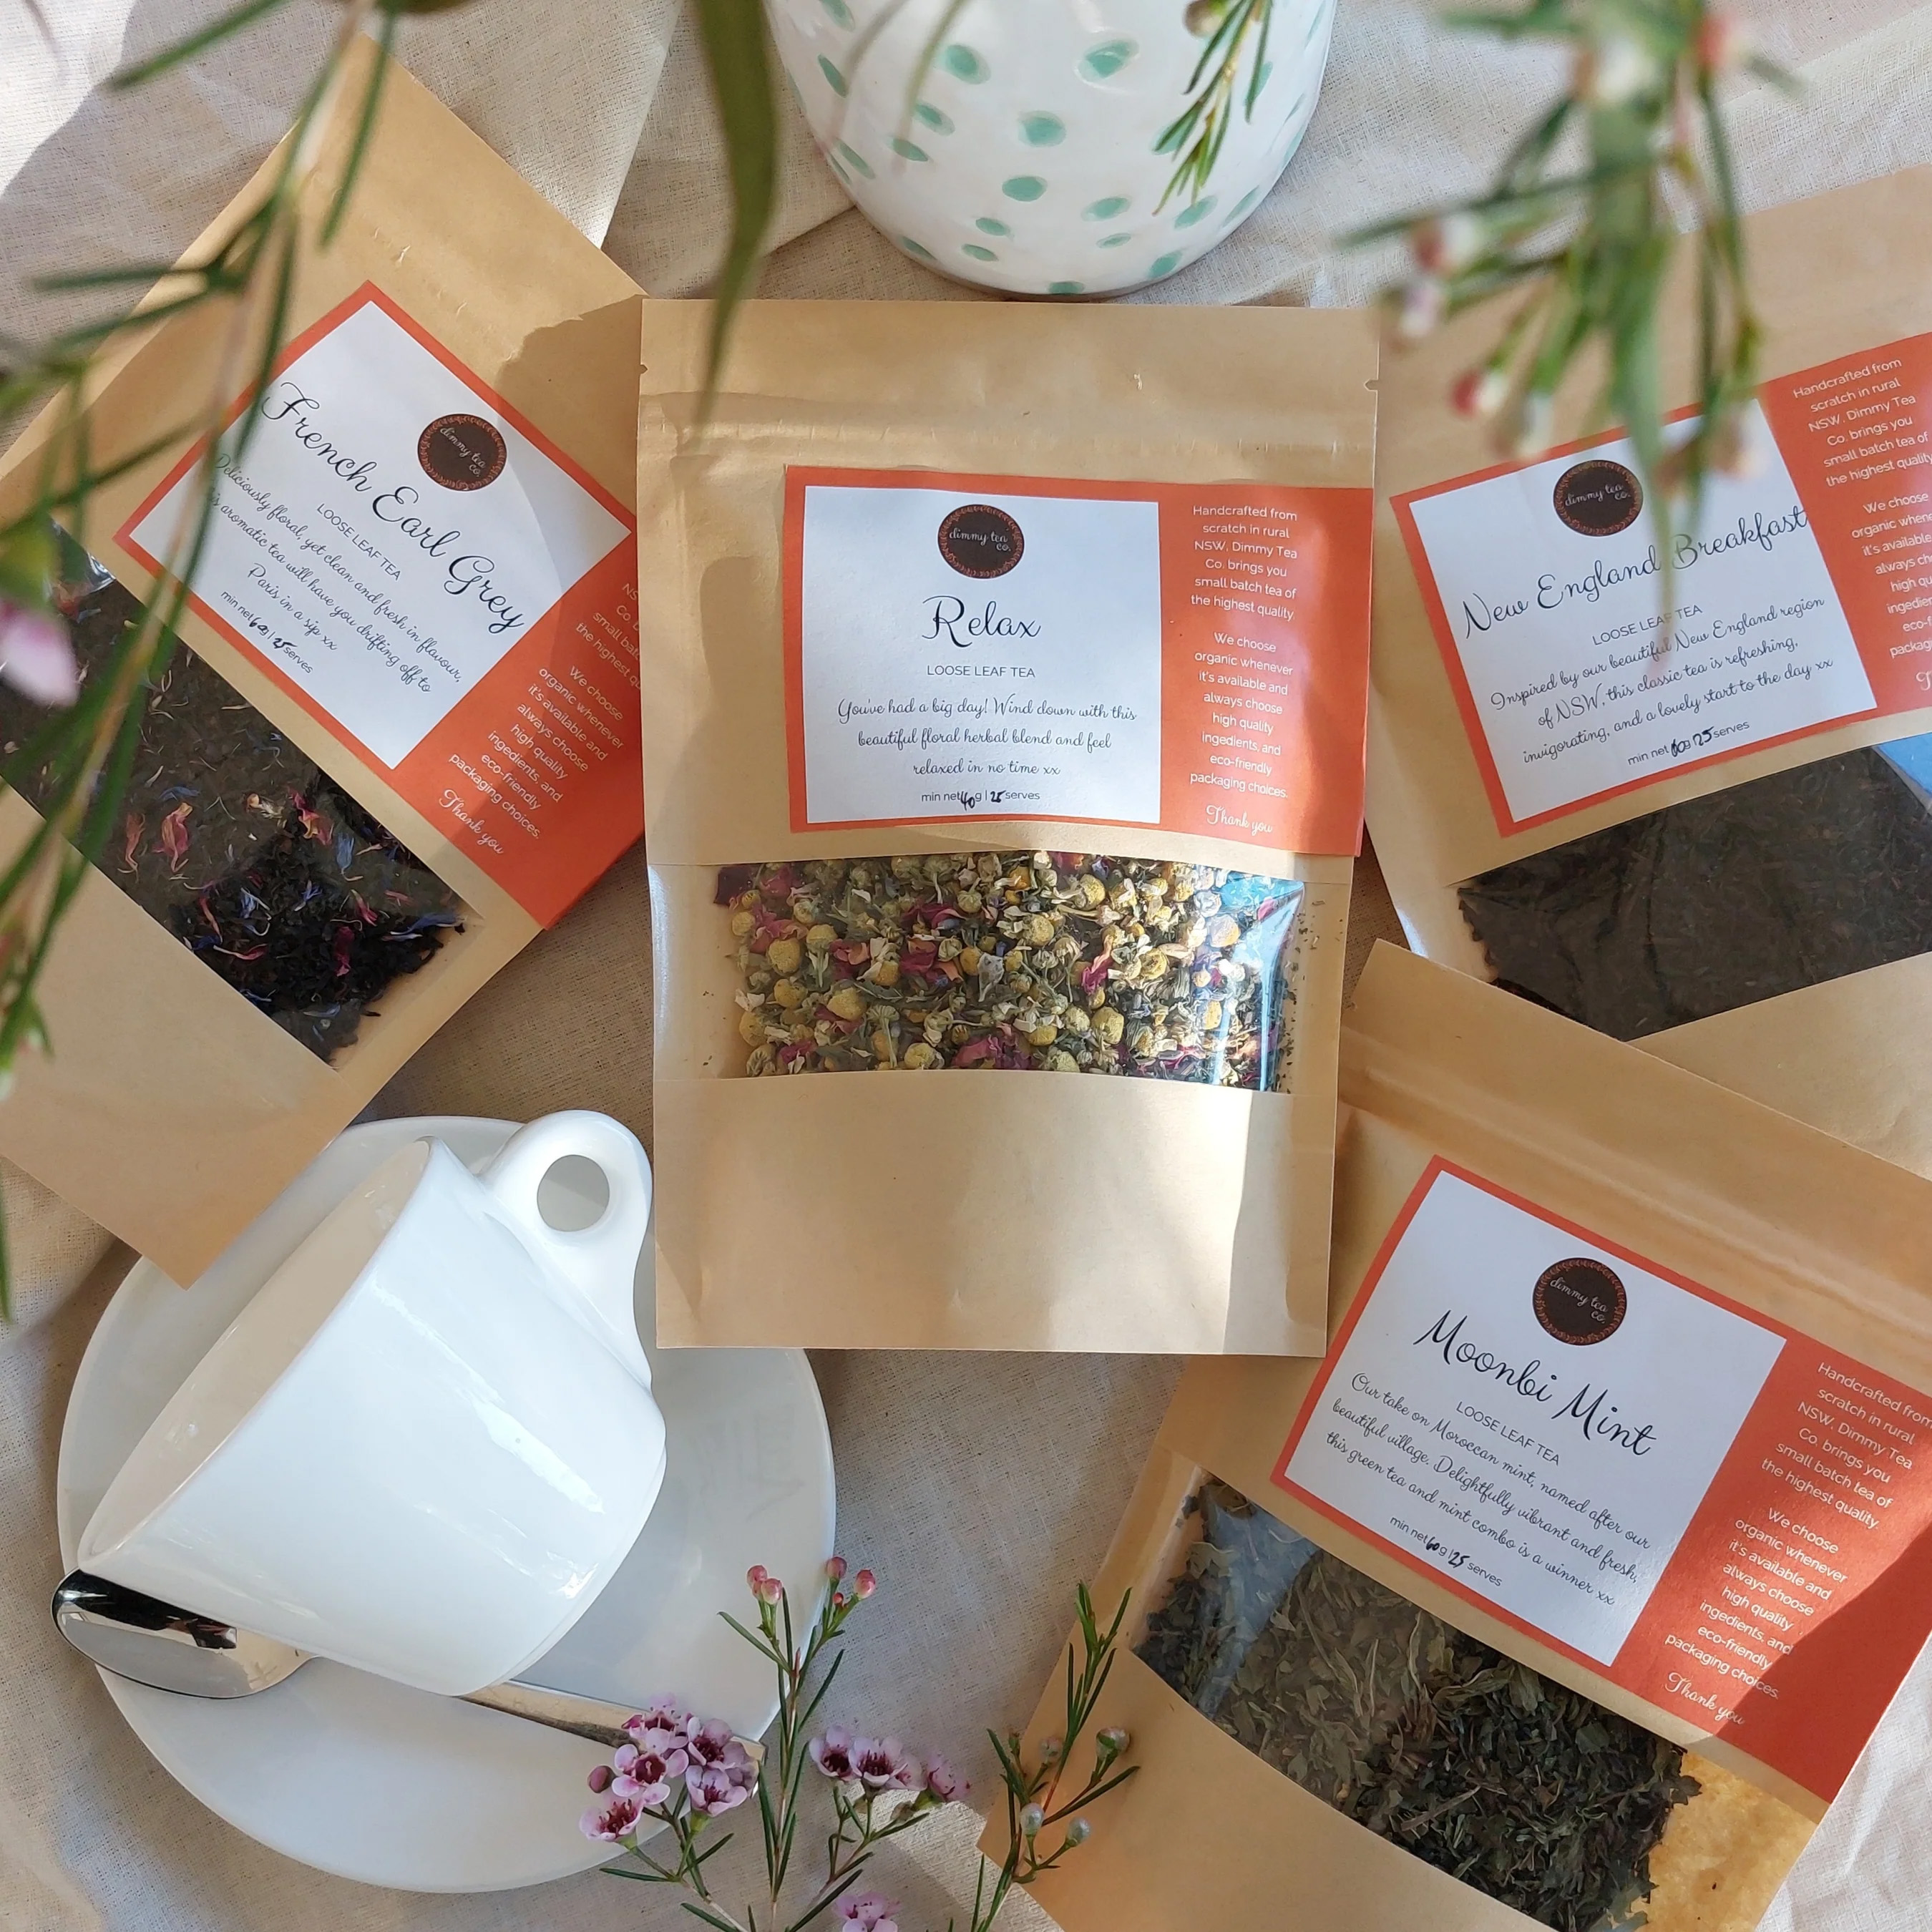 Tea Time with Dimity from Dimmy Tea Co.